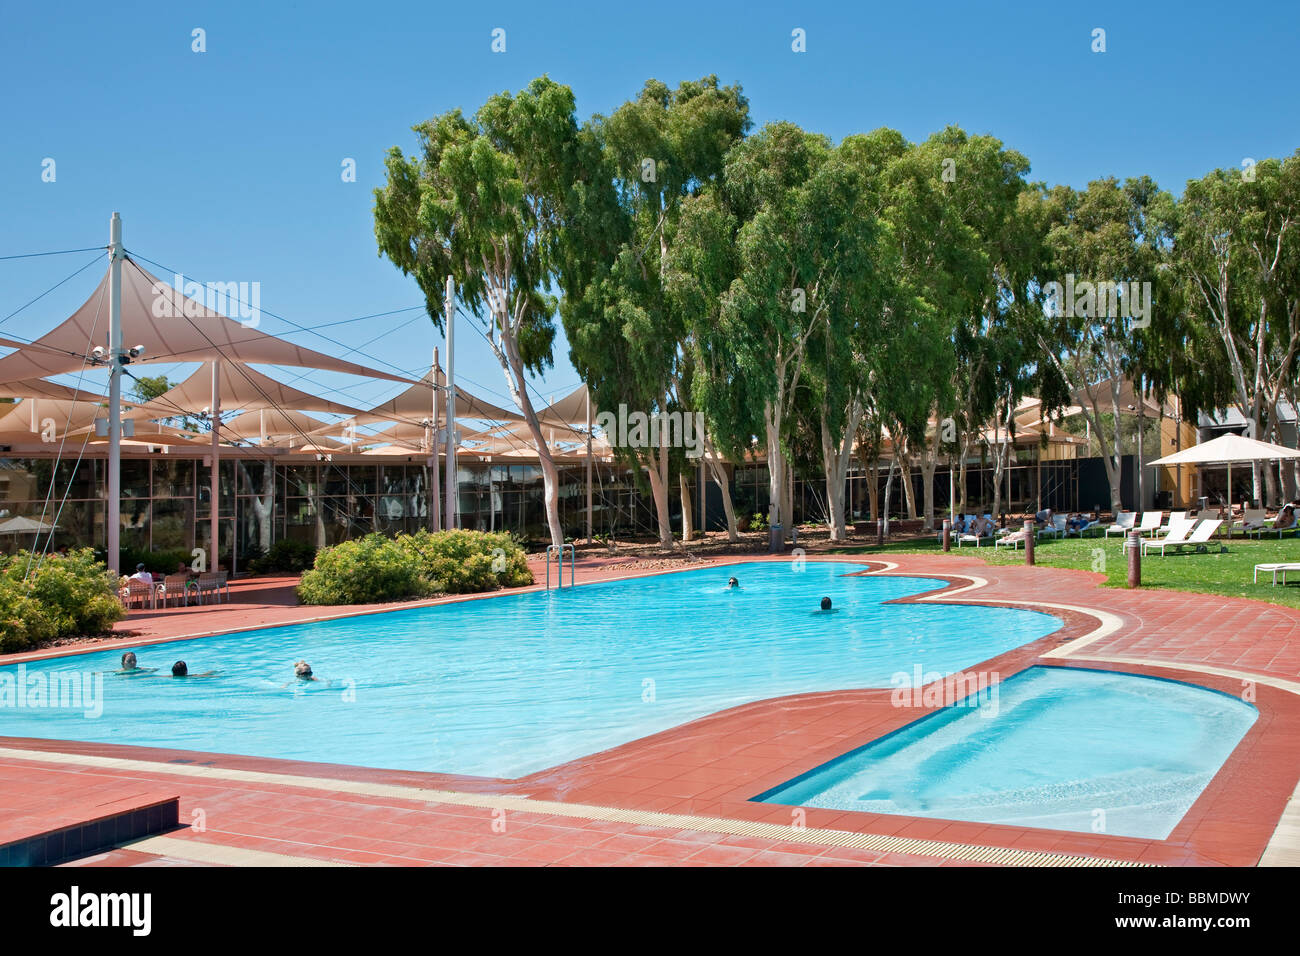 Austrailia, Northern Territory. The swimming pool at the Sails of the Desert Hotel at Uluru or Ayres Rock. Stock Photo